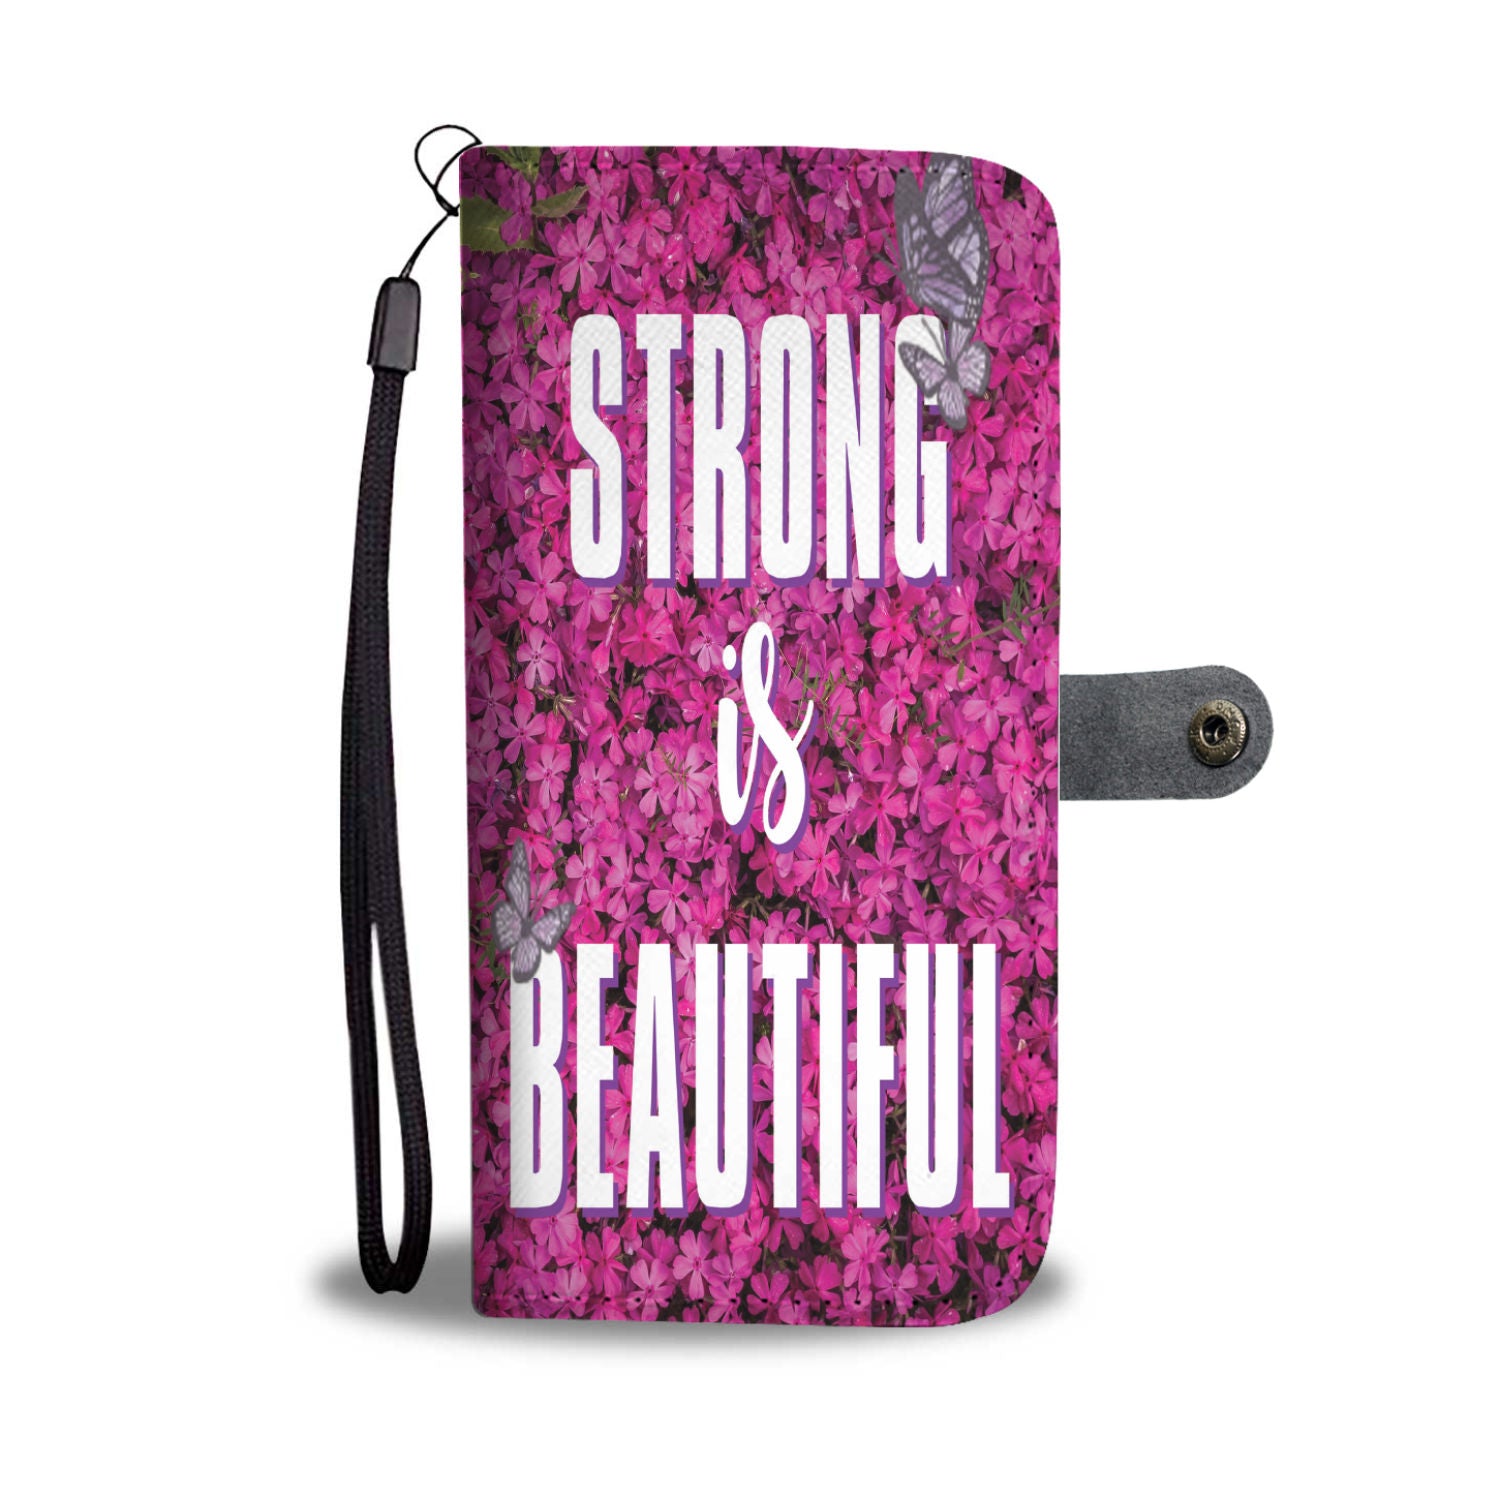 Custom Phone Wallet Available For All Phone Models Strong Is Beautiful Phone Wallet